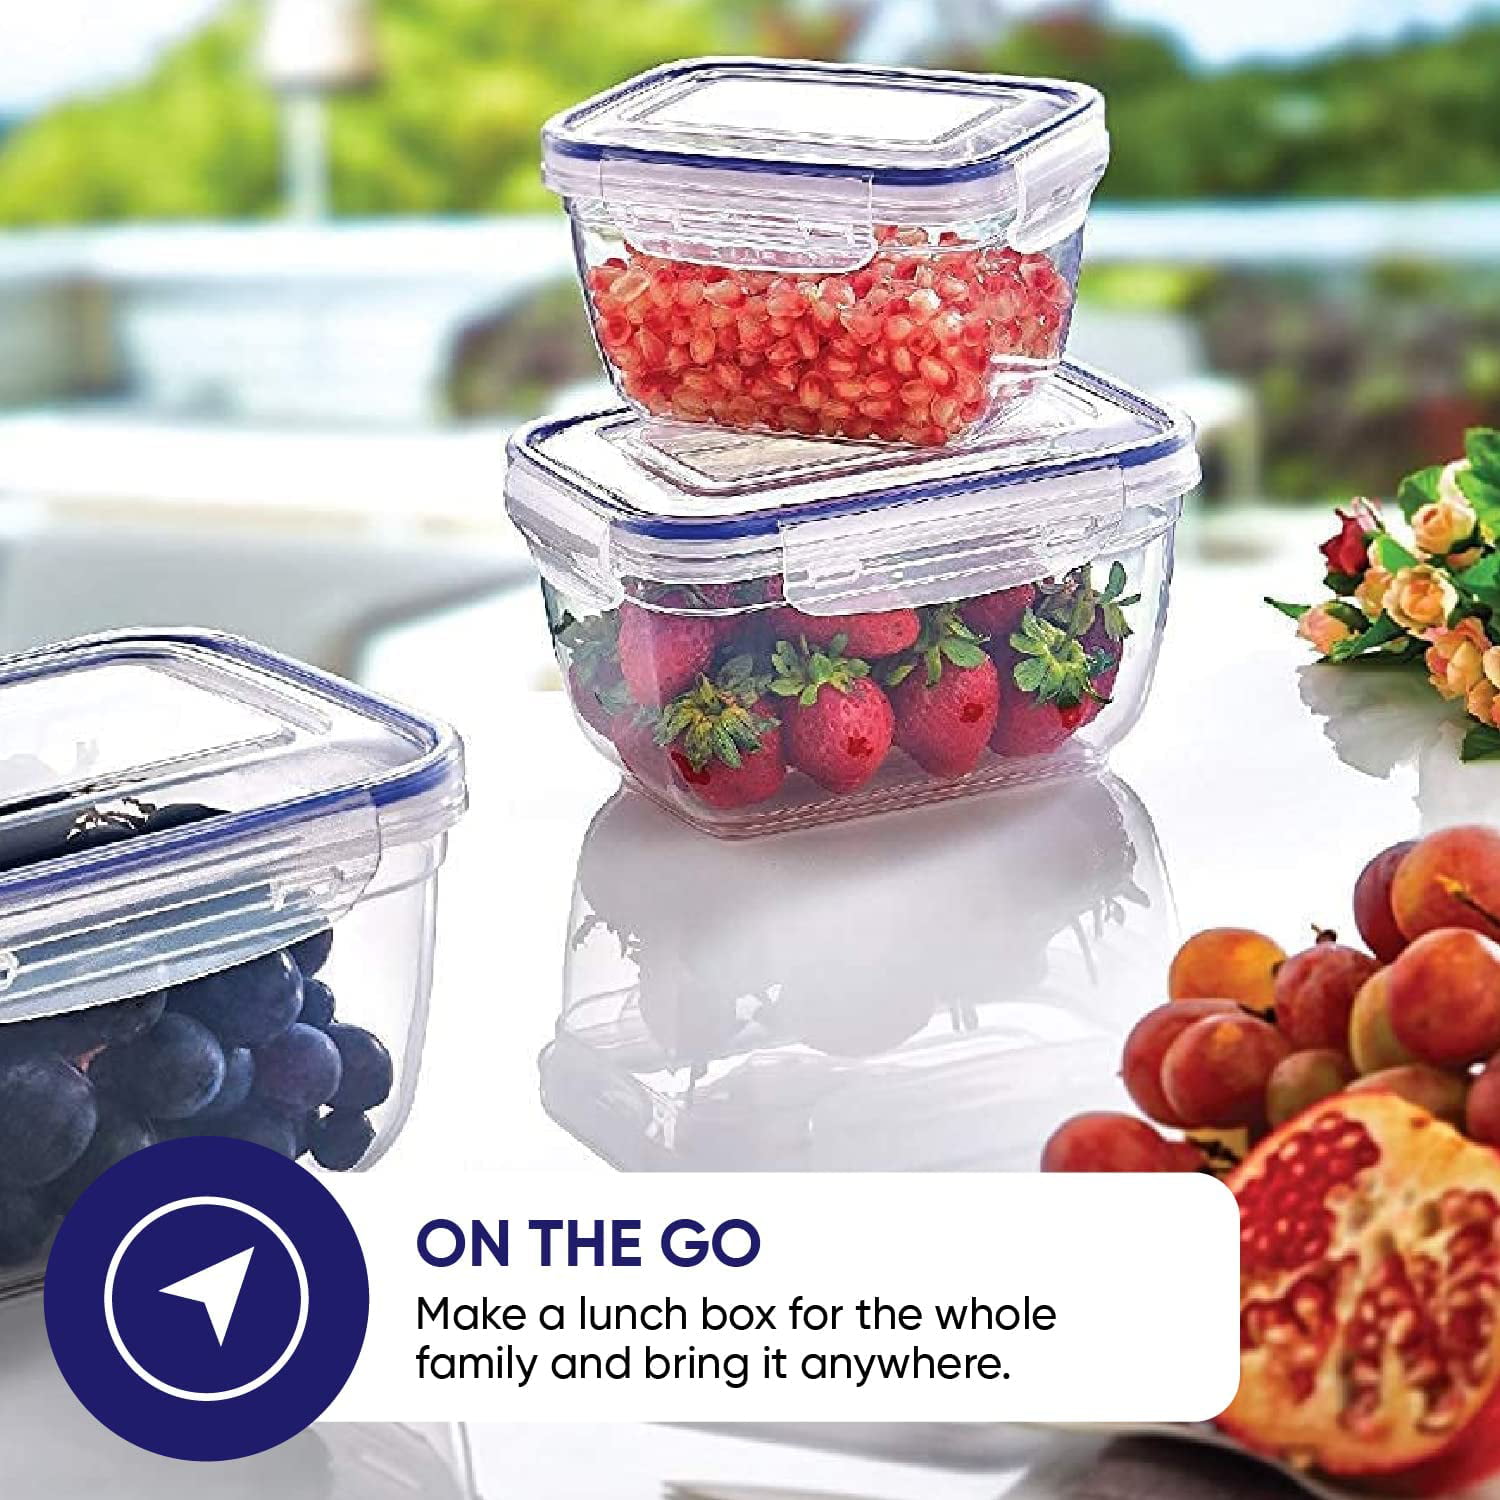 Superio Rectangular Sealed Containers For Food (4 Pack), (2) 4.2 Quart, (2)  2.5 Quart Plastic Container With Lid Keeps Food Fresh- For Pantry, Fridge